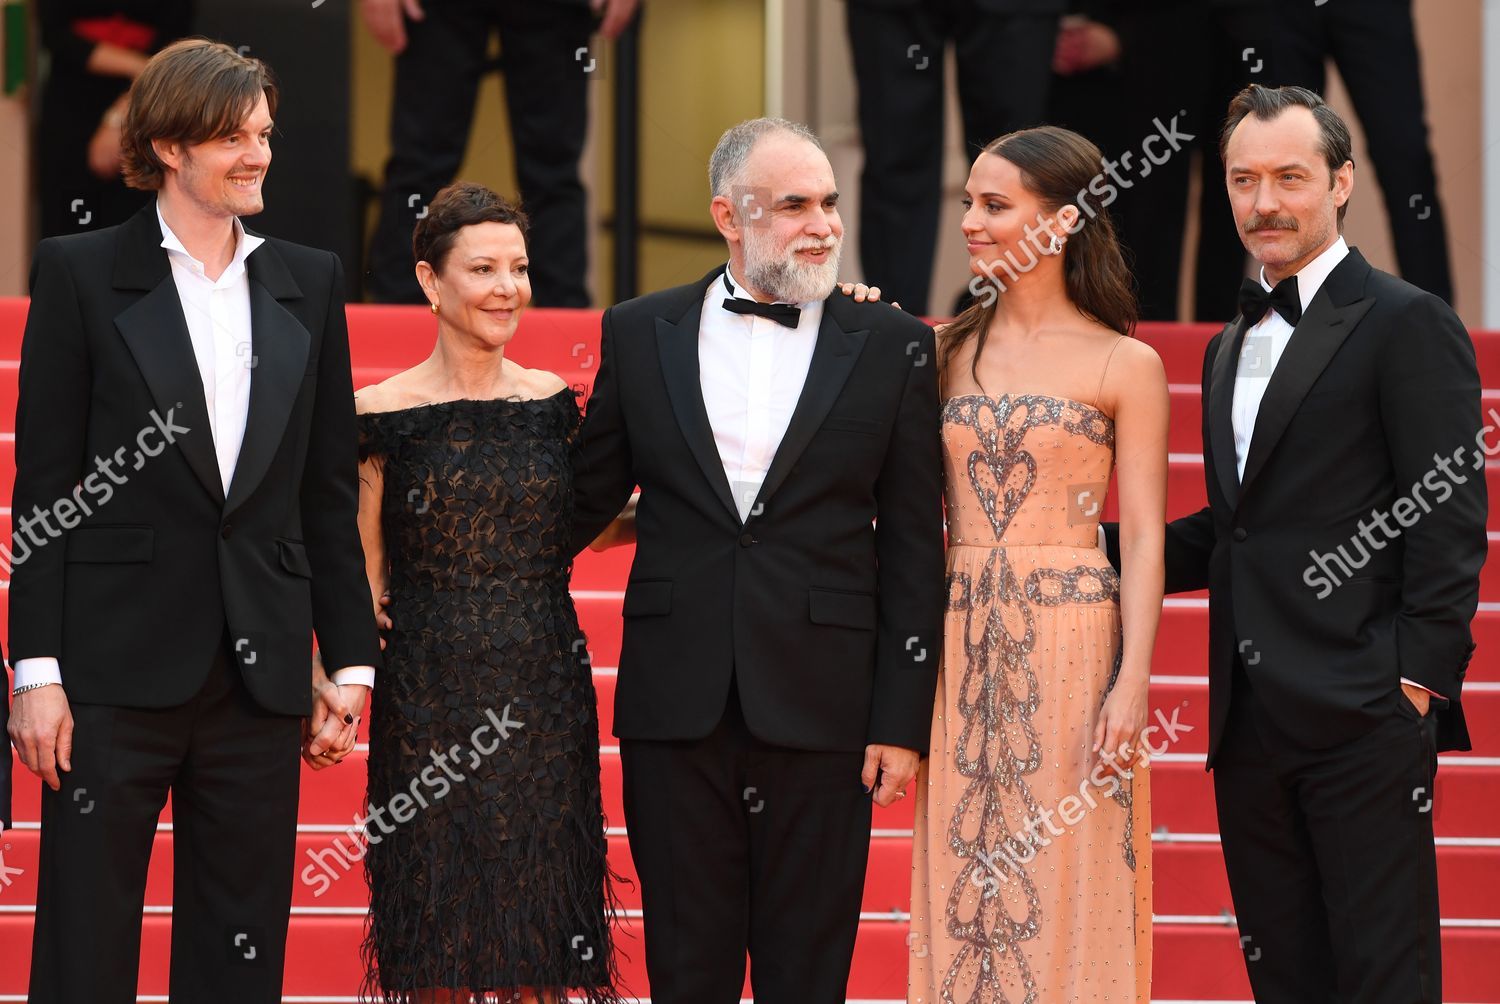 Cannes, France. 21st May, 2023. Alicia Vikander attend the